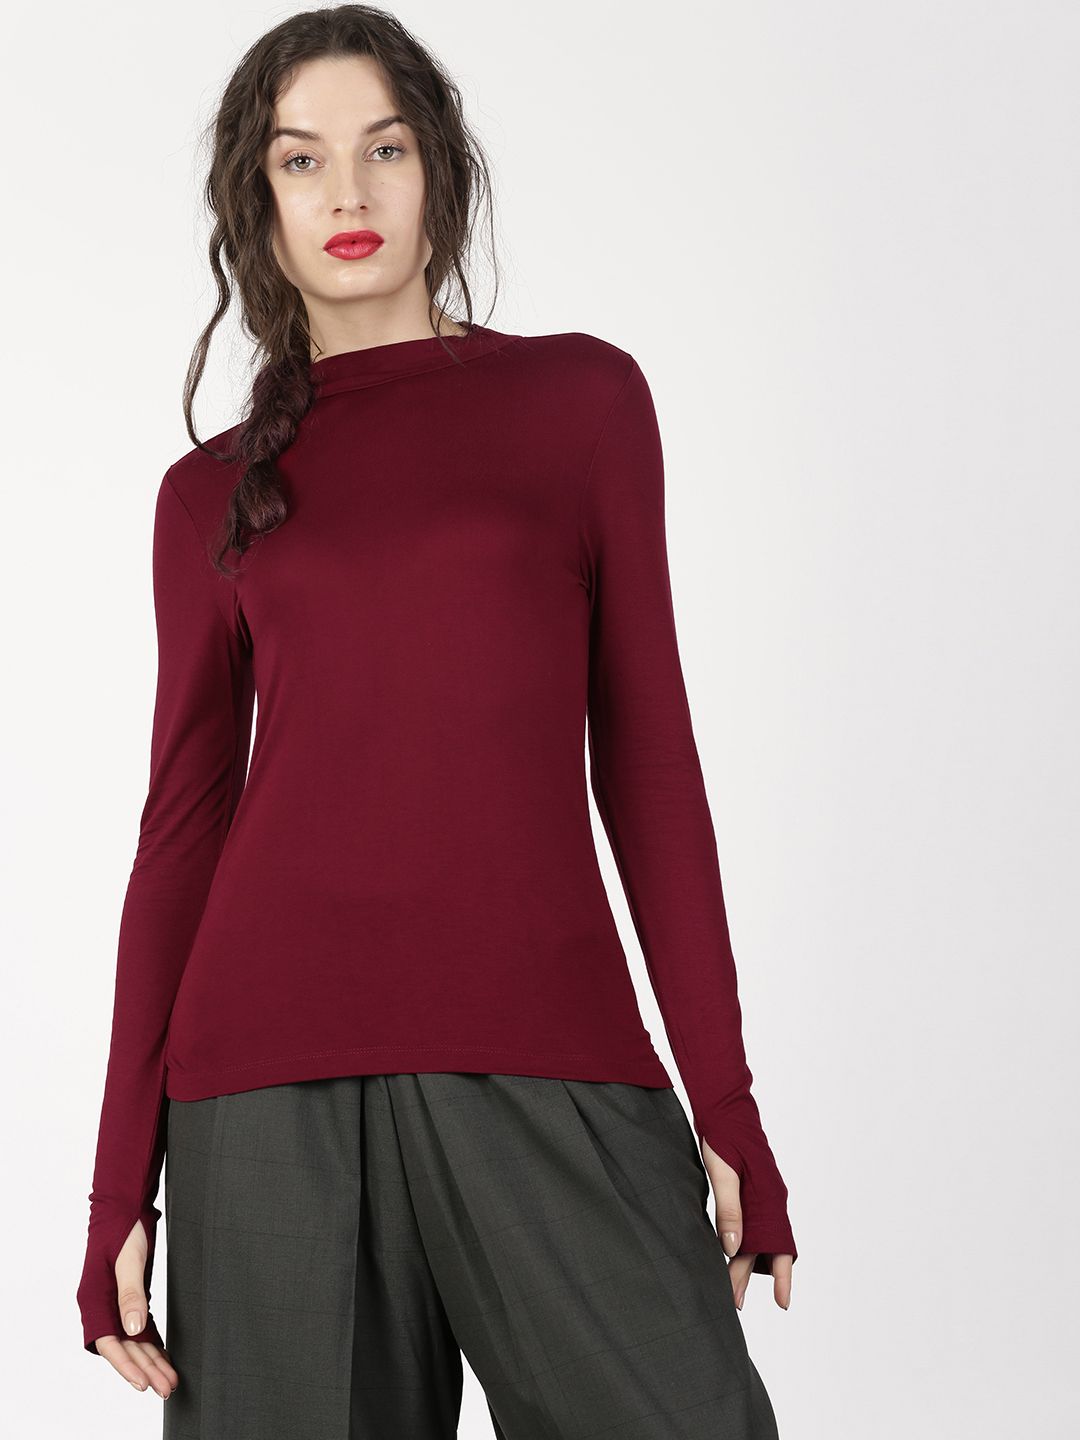 ether Women Burgundy Solid High Neck Long Sleeve With Thumbhole Round Neck T-shirt